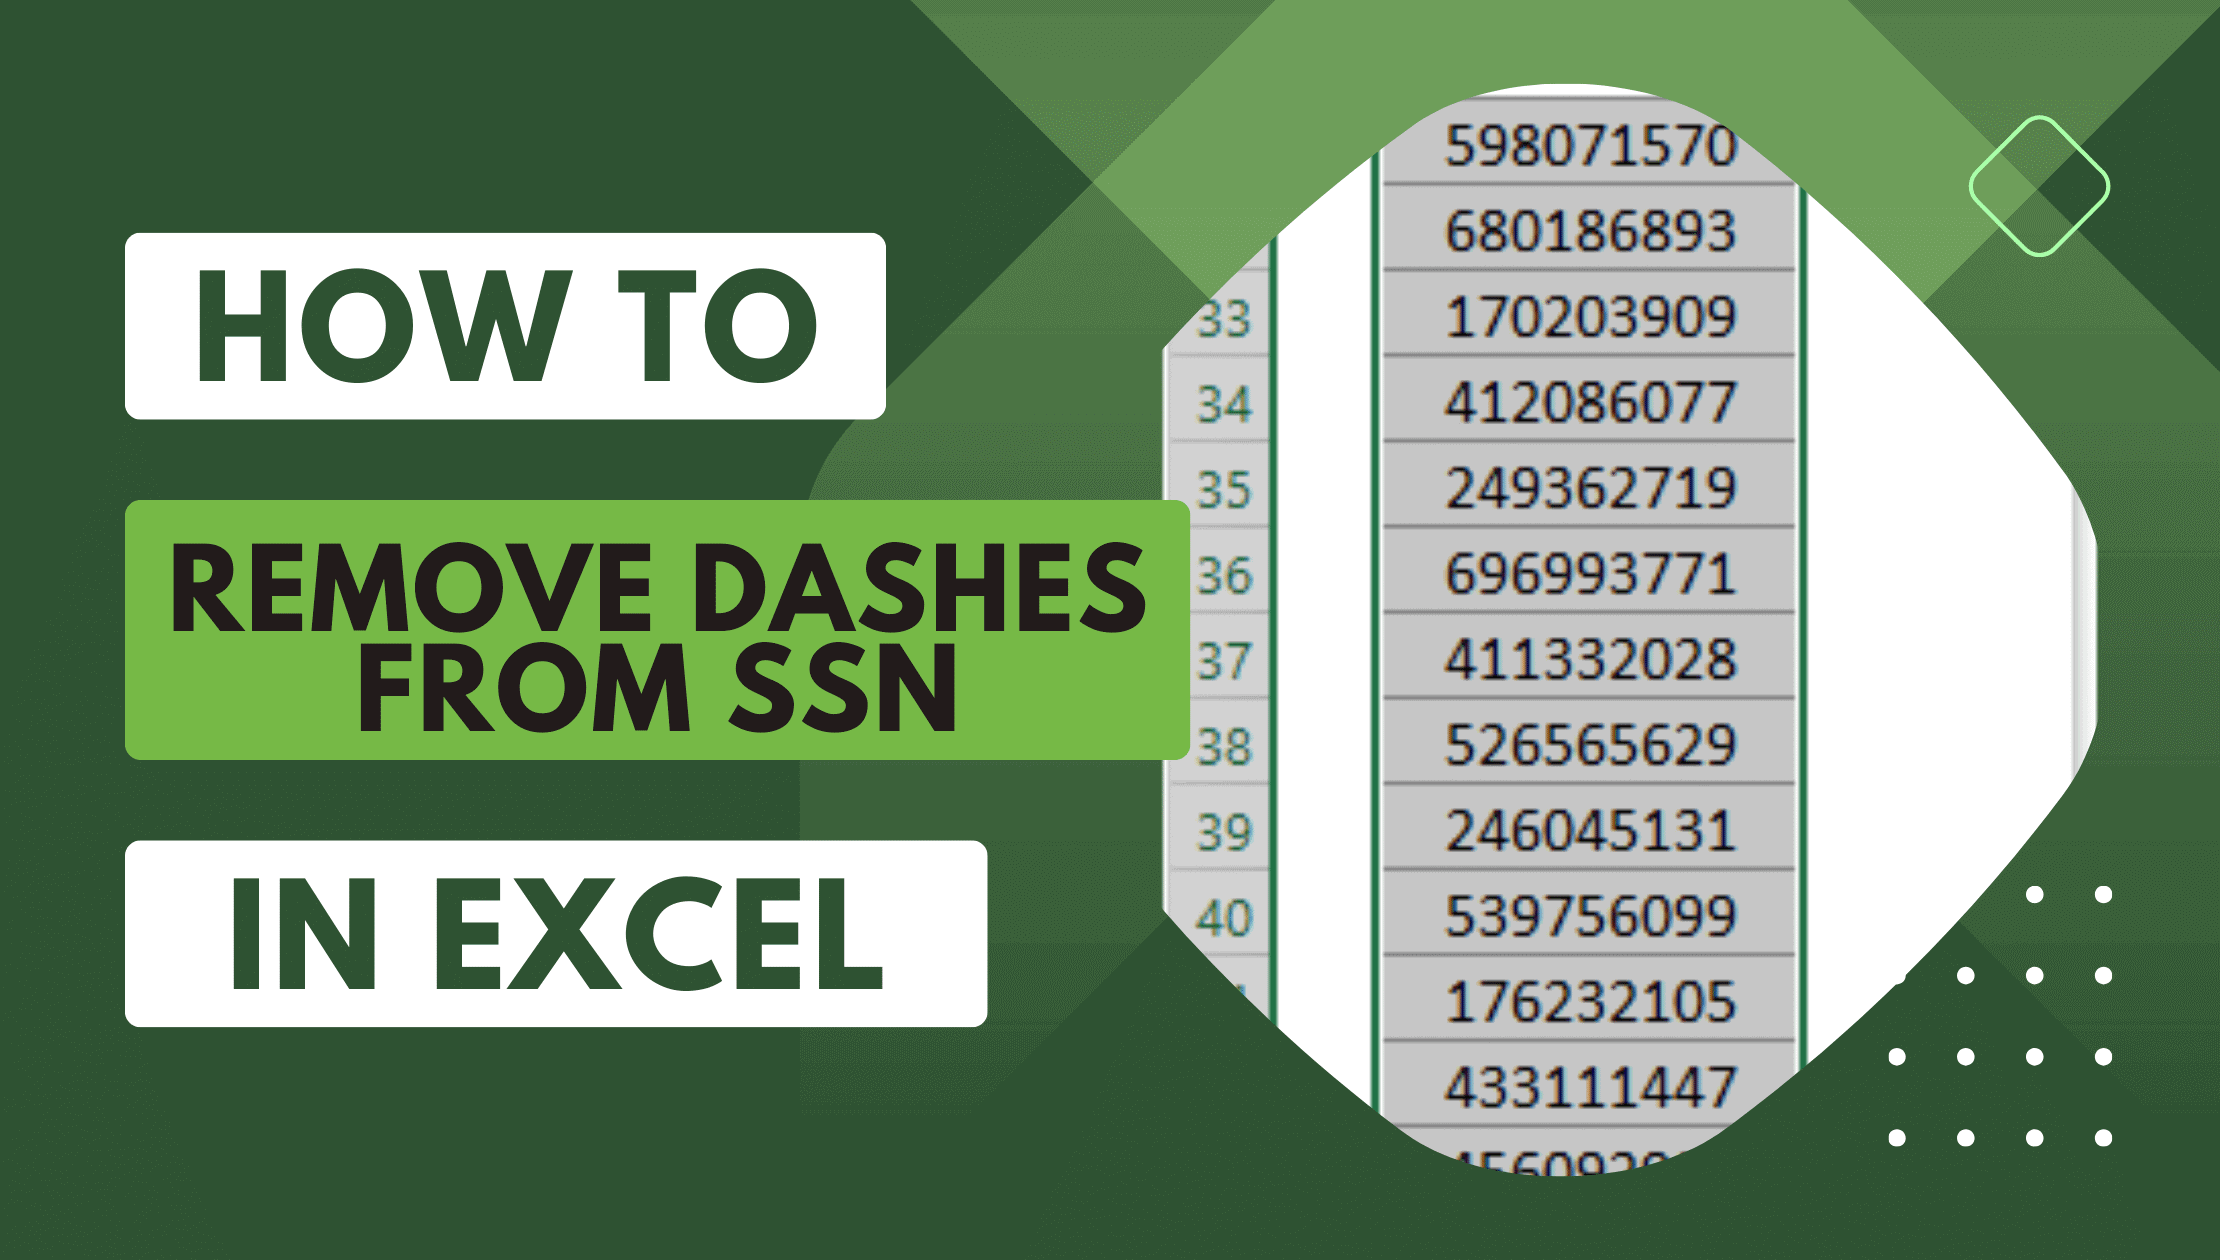 Easy Guide How to Remove Dashes from SSN in Excel